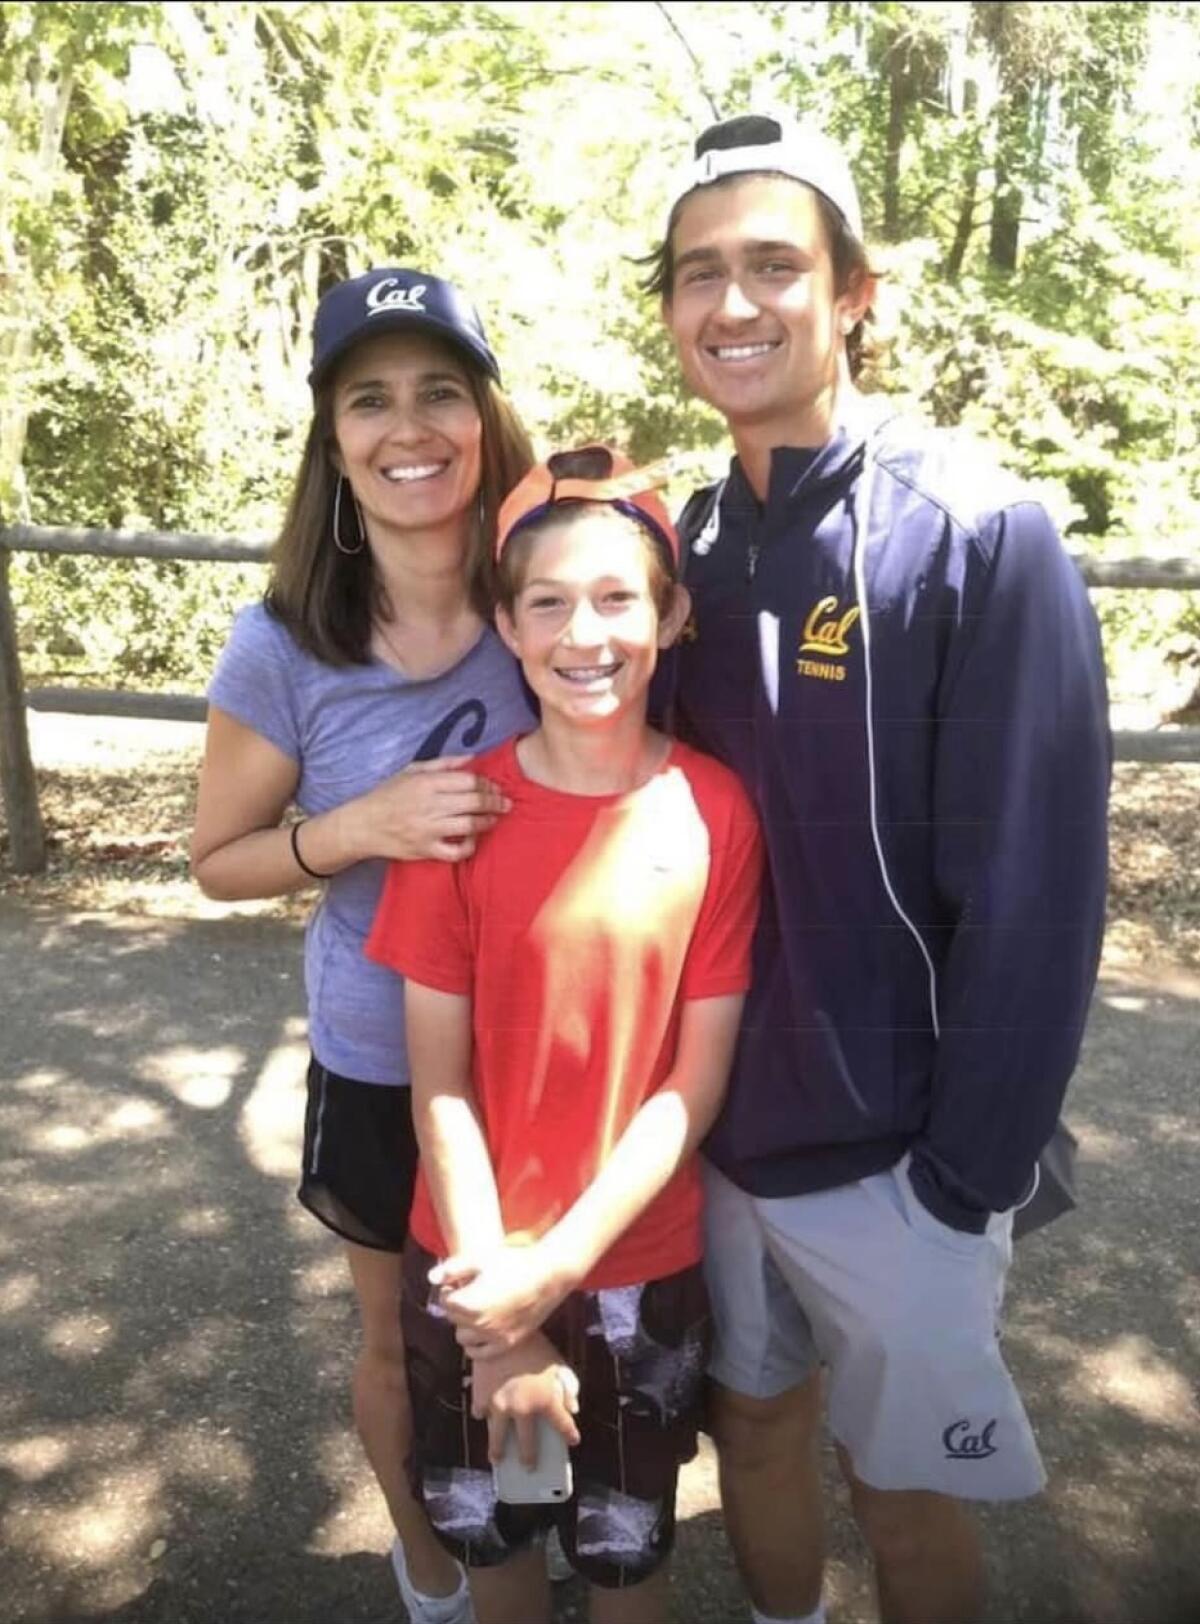 Niels Hoffmann with his mother Biljana Longman and older brother Bjorn Hoffmann, then playing for Cal, at "The Ojai" in 2016.